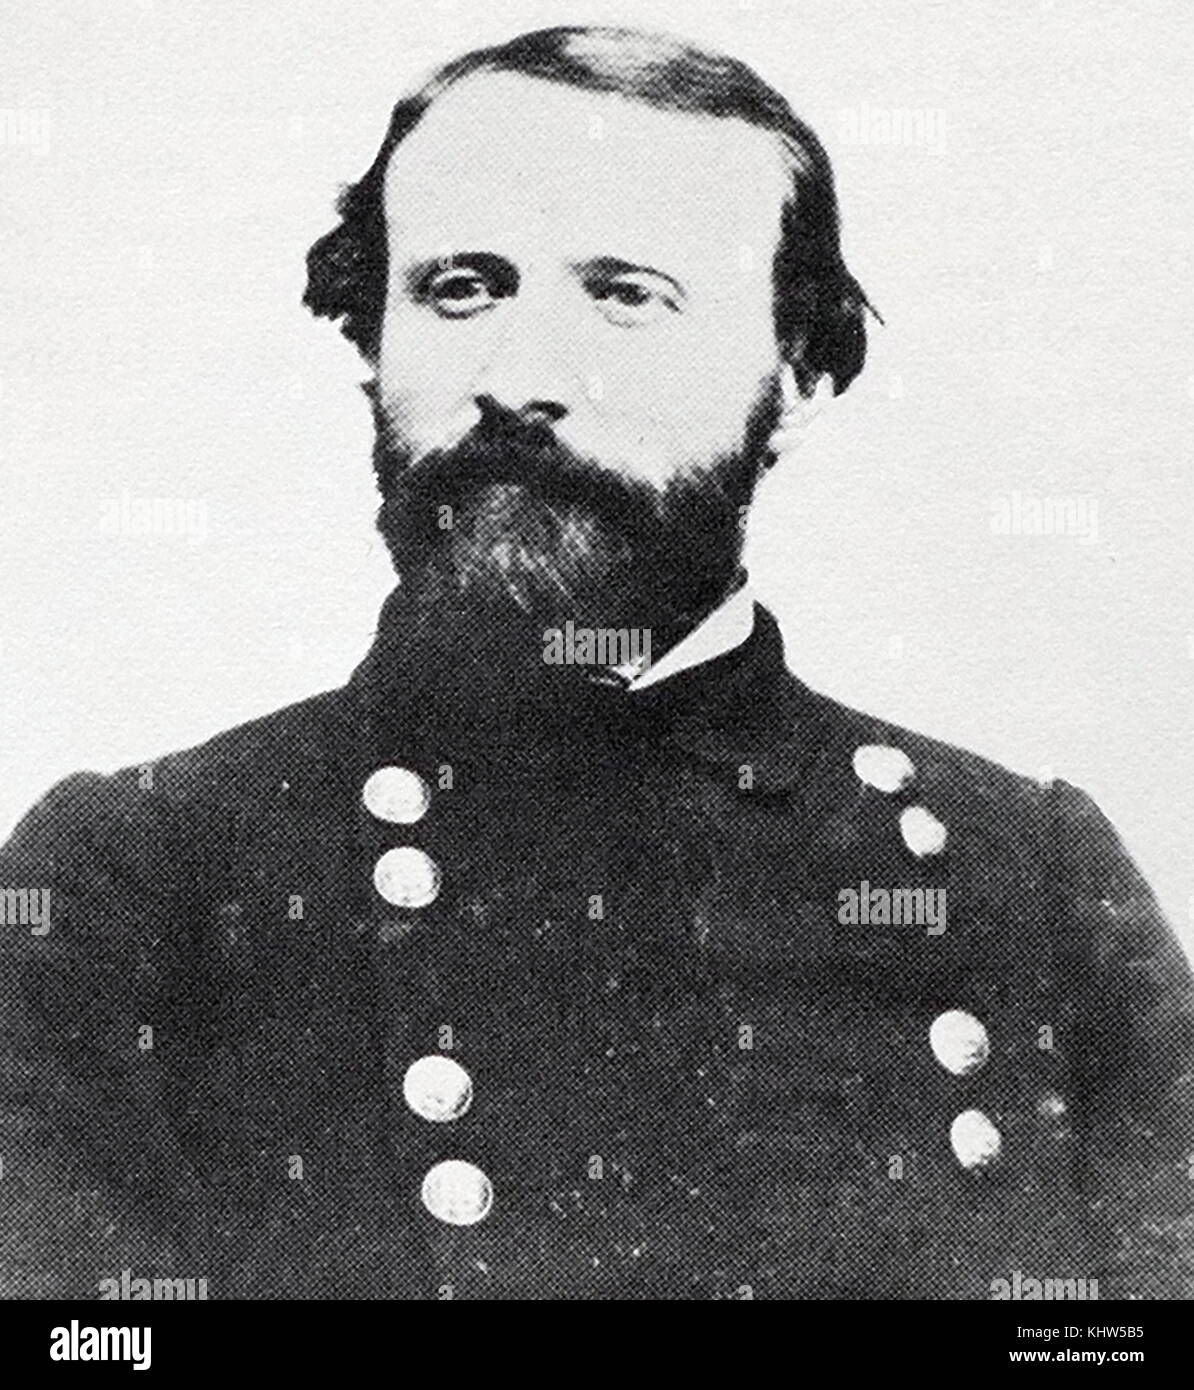 Photographic portrait of Thomas Jordan (1819-1895) Confederate general major operative in the network of spies during the American Civil War. Dated 19th Century Stock Photo - Alamy